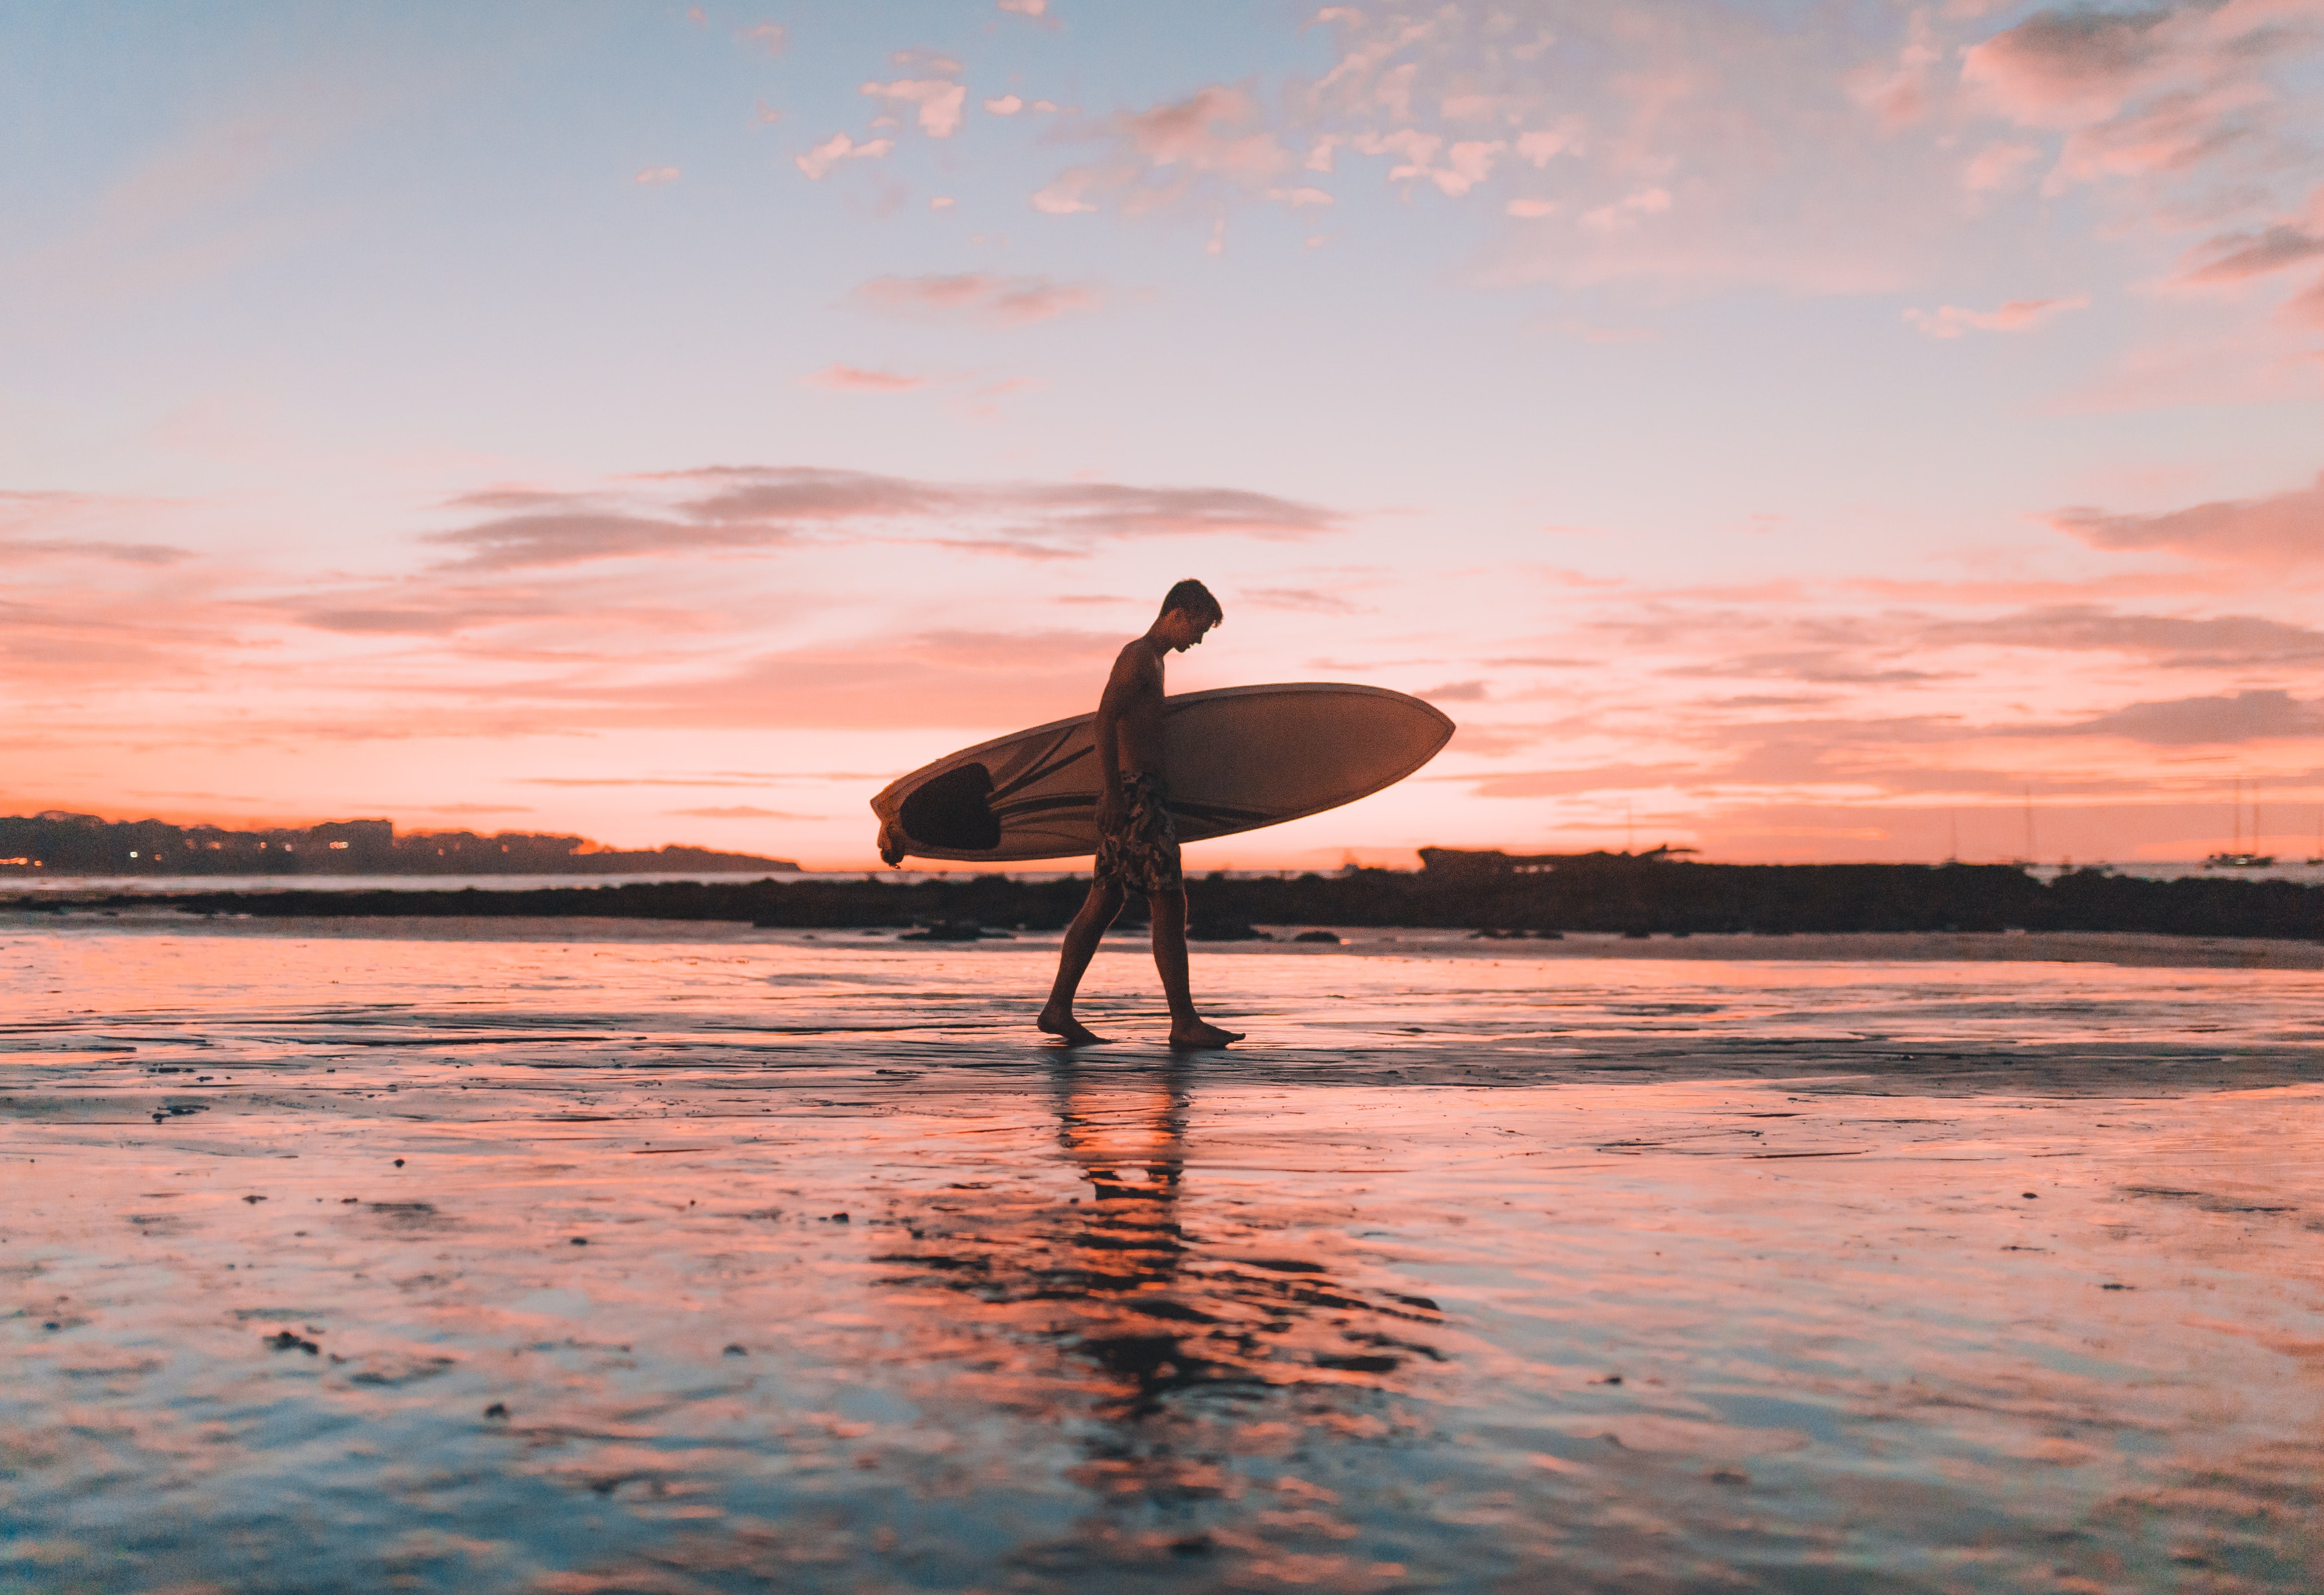 What Do You Need To Do Before Surfing?